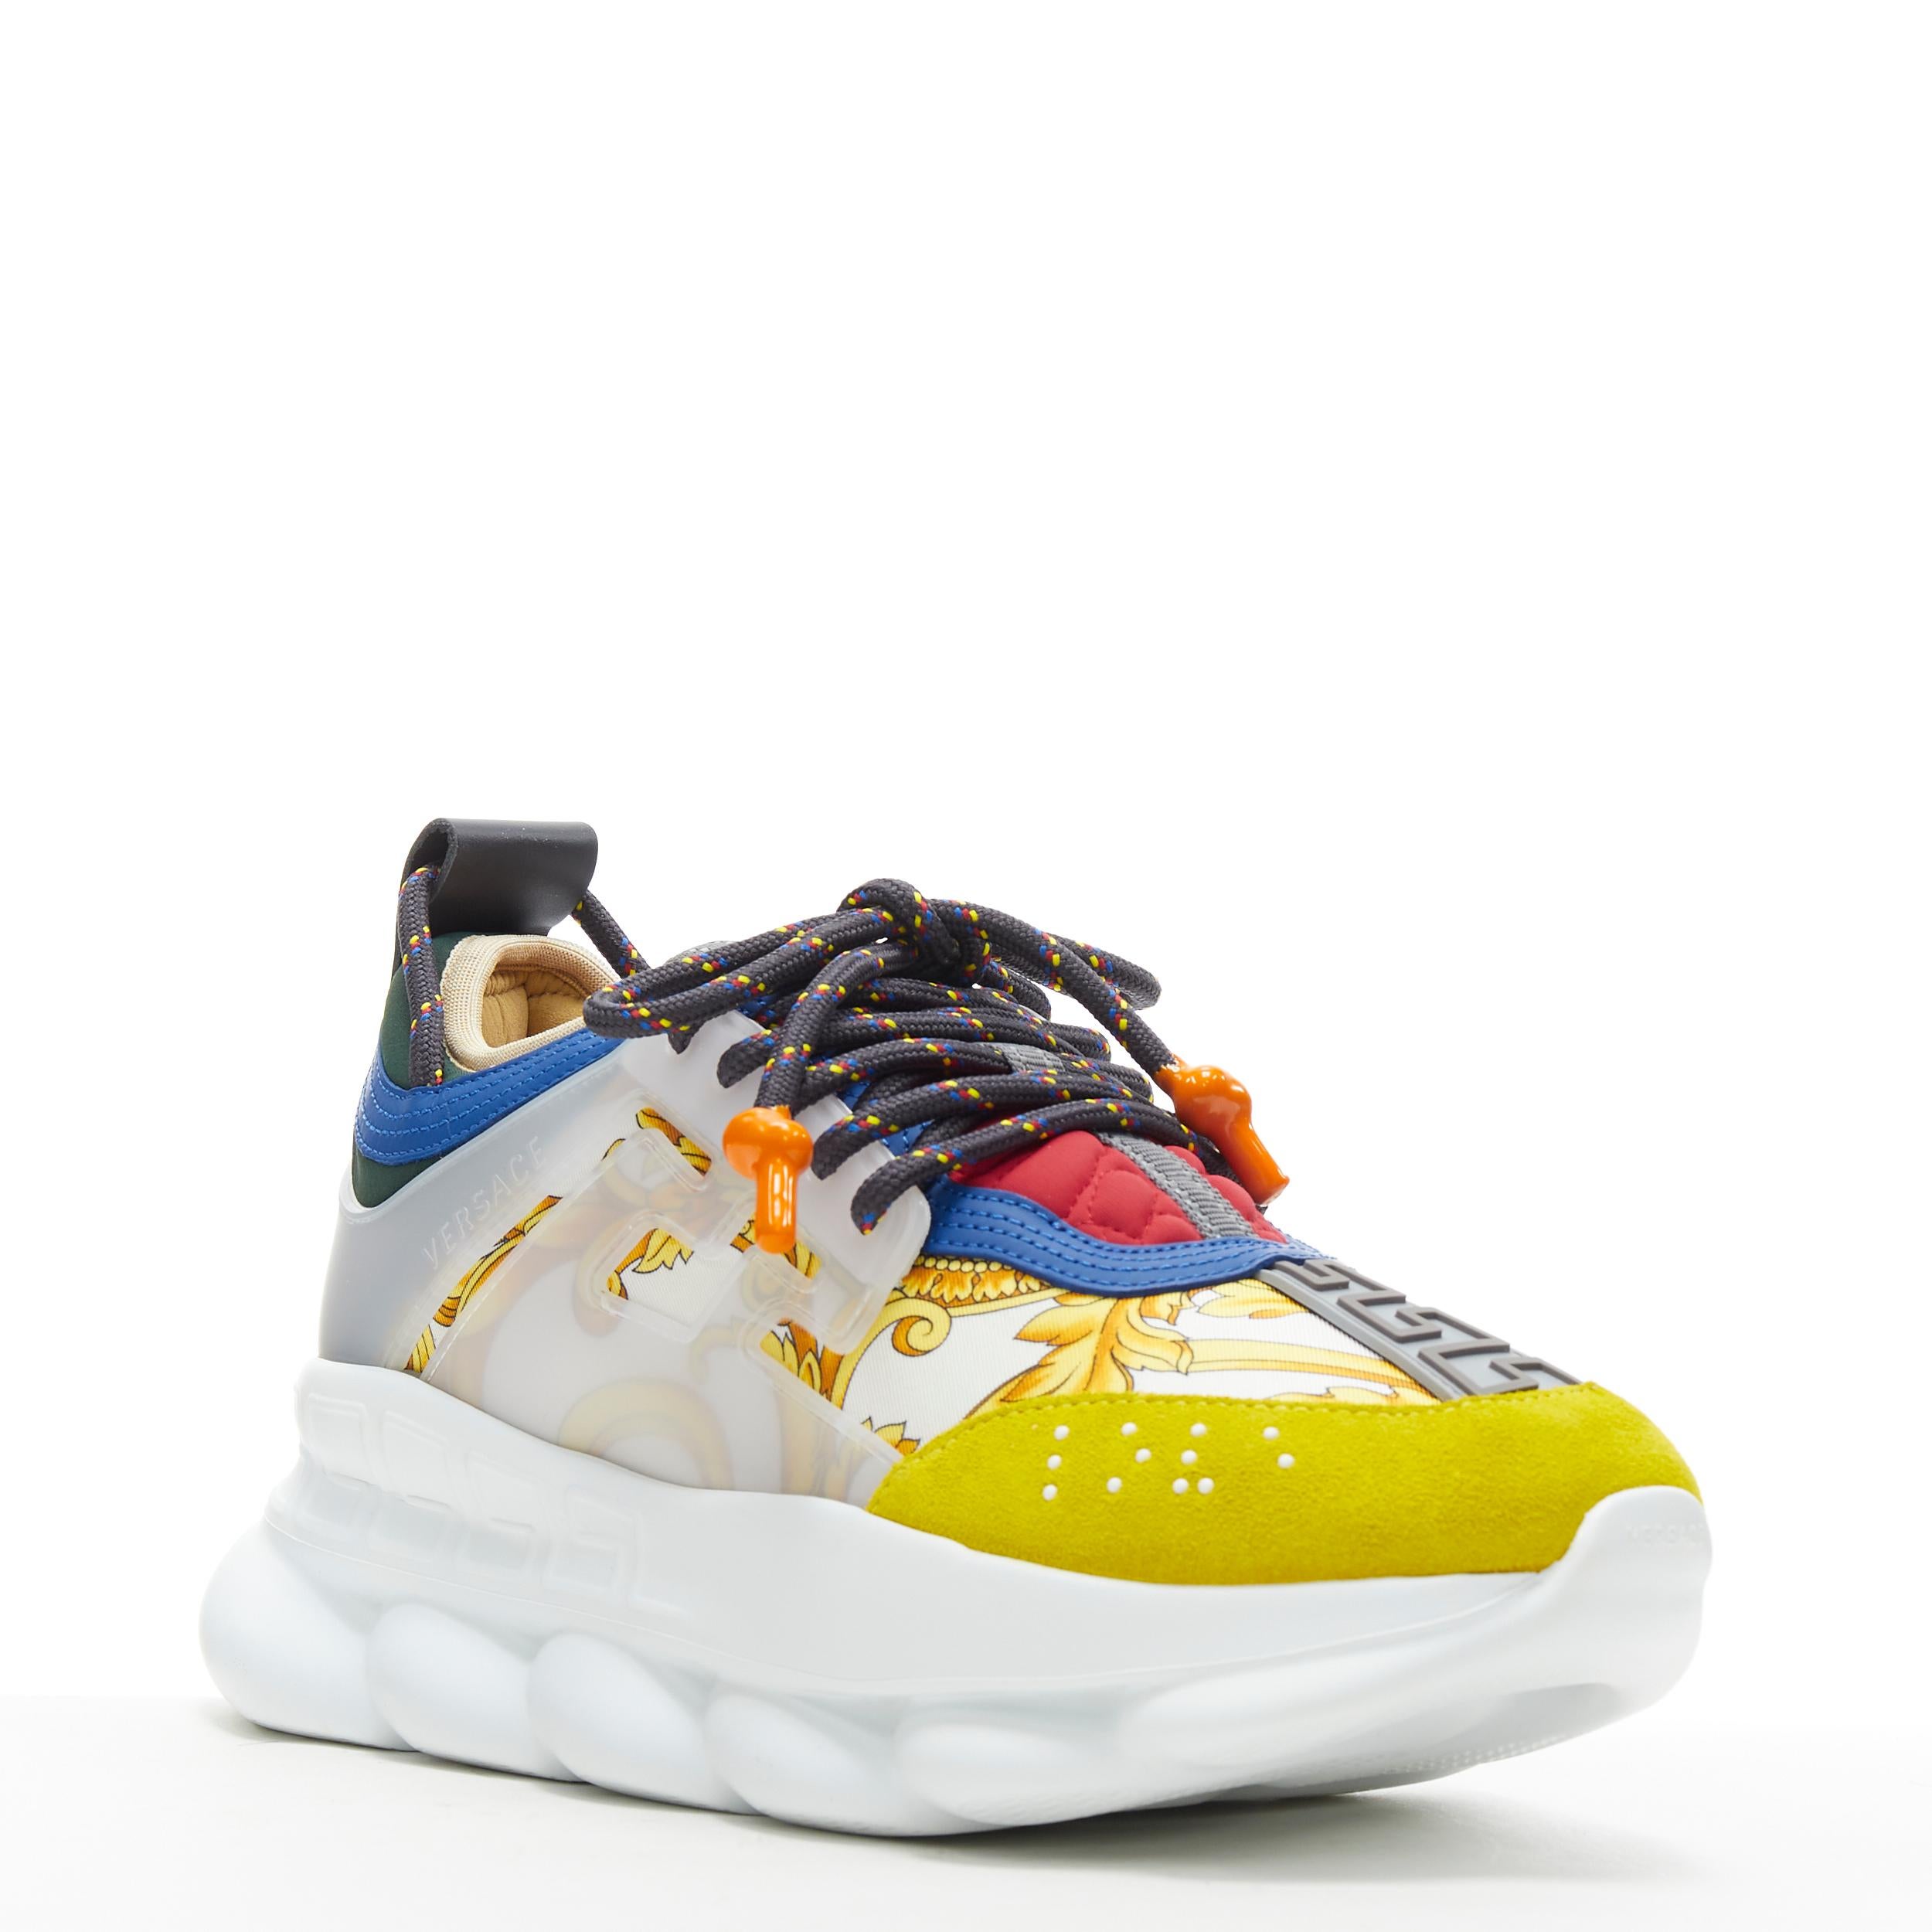 new VERSACE Chain Reaction gold barocco twill yellow blue suede sneaker EU39 US6 
Reference: TGAS/B00872 
Brand: Versace 
Designer: Salehe Bembury 
Model: Chain Reaction White Barocco 
Material: Leather 
Color: Gold 
Pattern: Solid 
Closure: Lace up